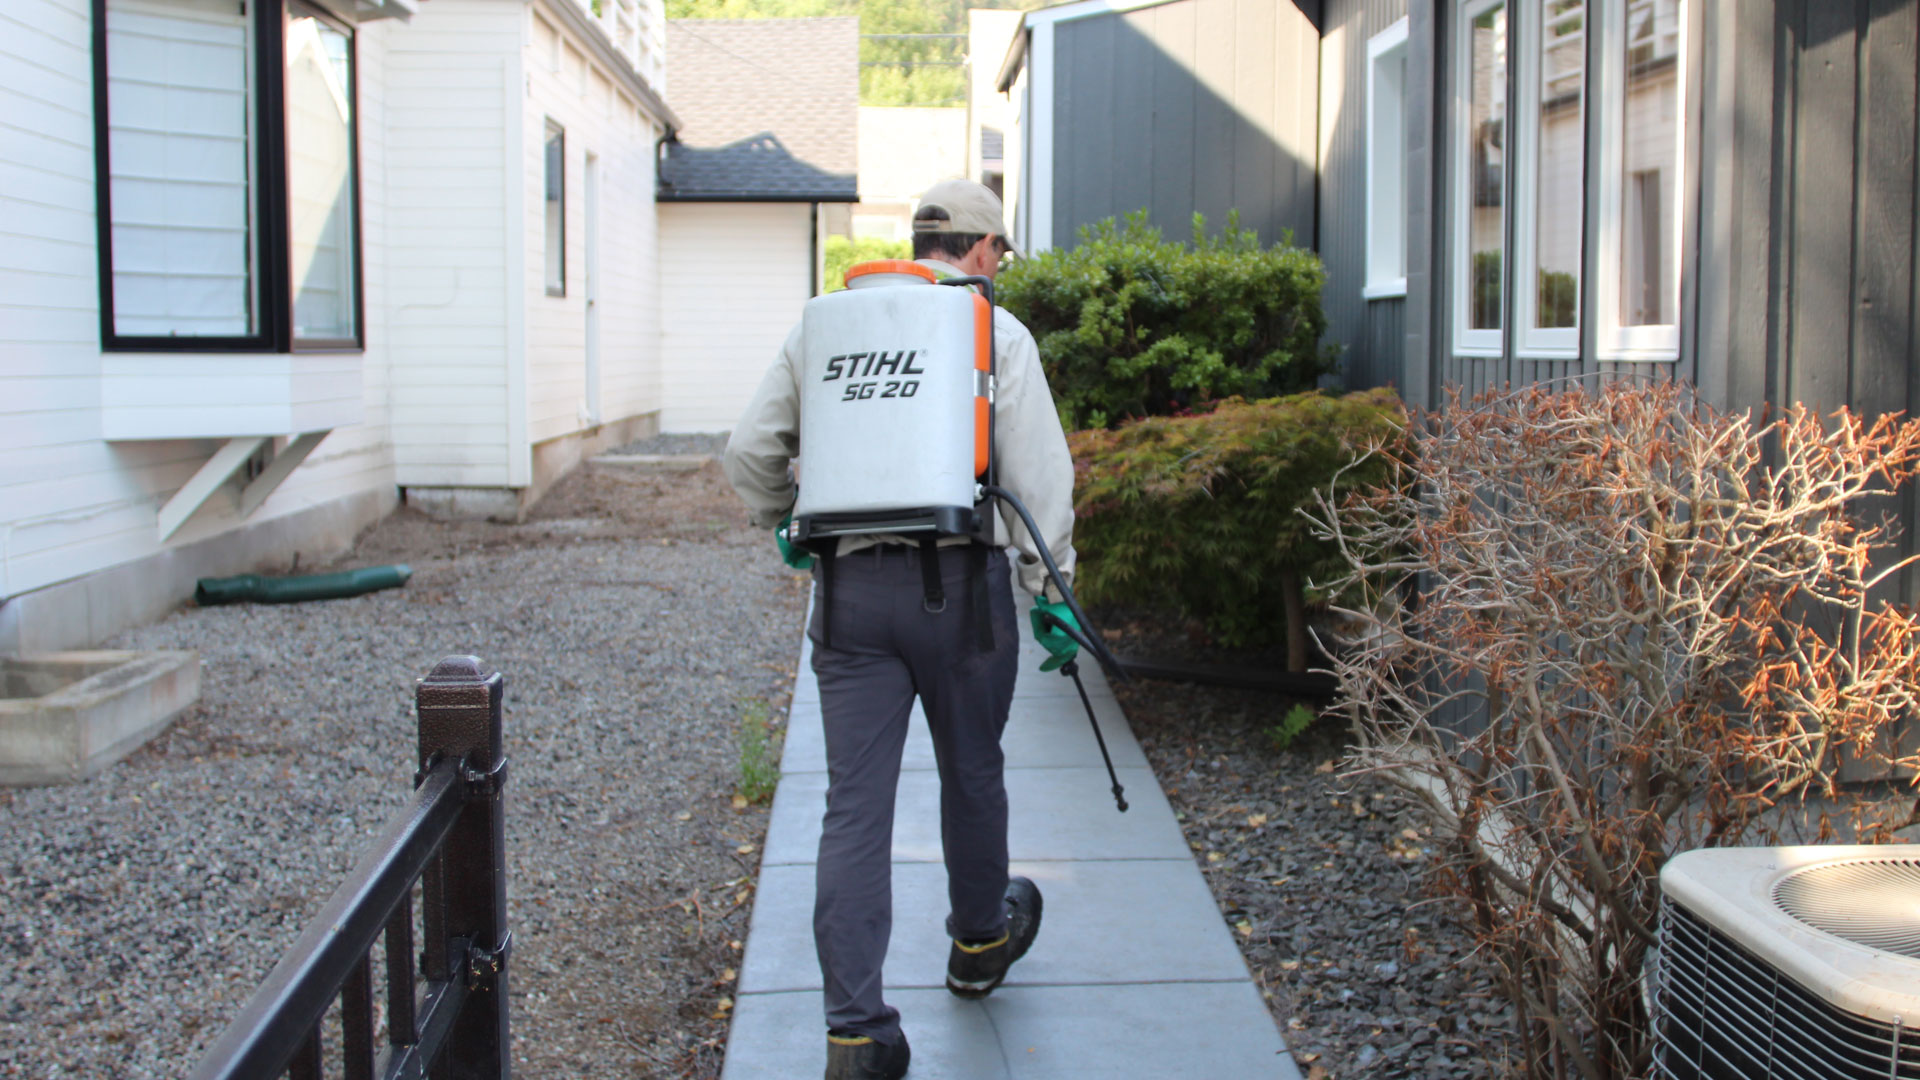 We are spraying this landscaping bed for weeds at a home in Spokane Valley, WA.